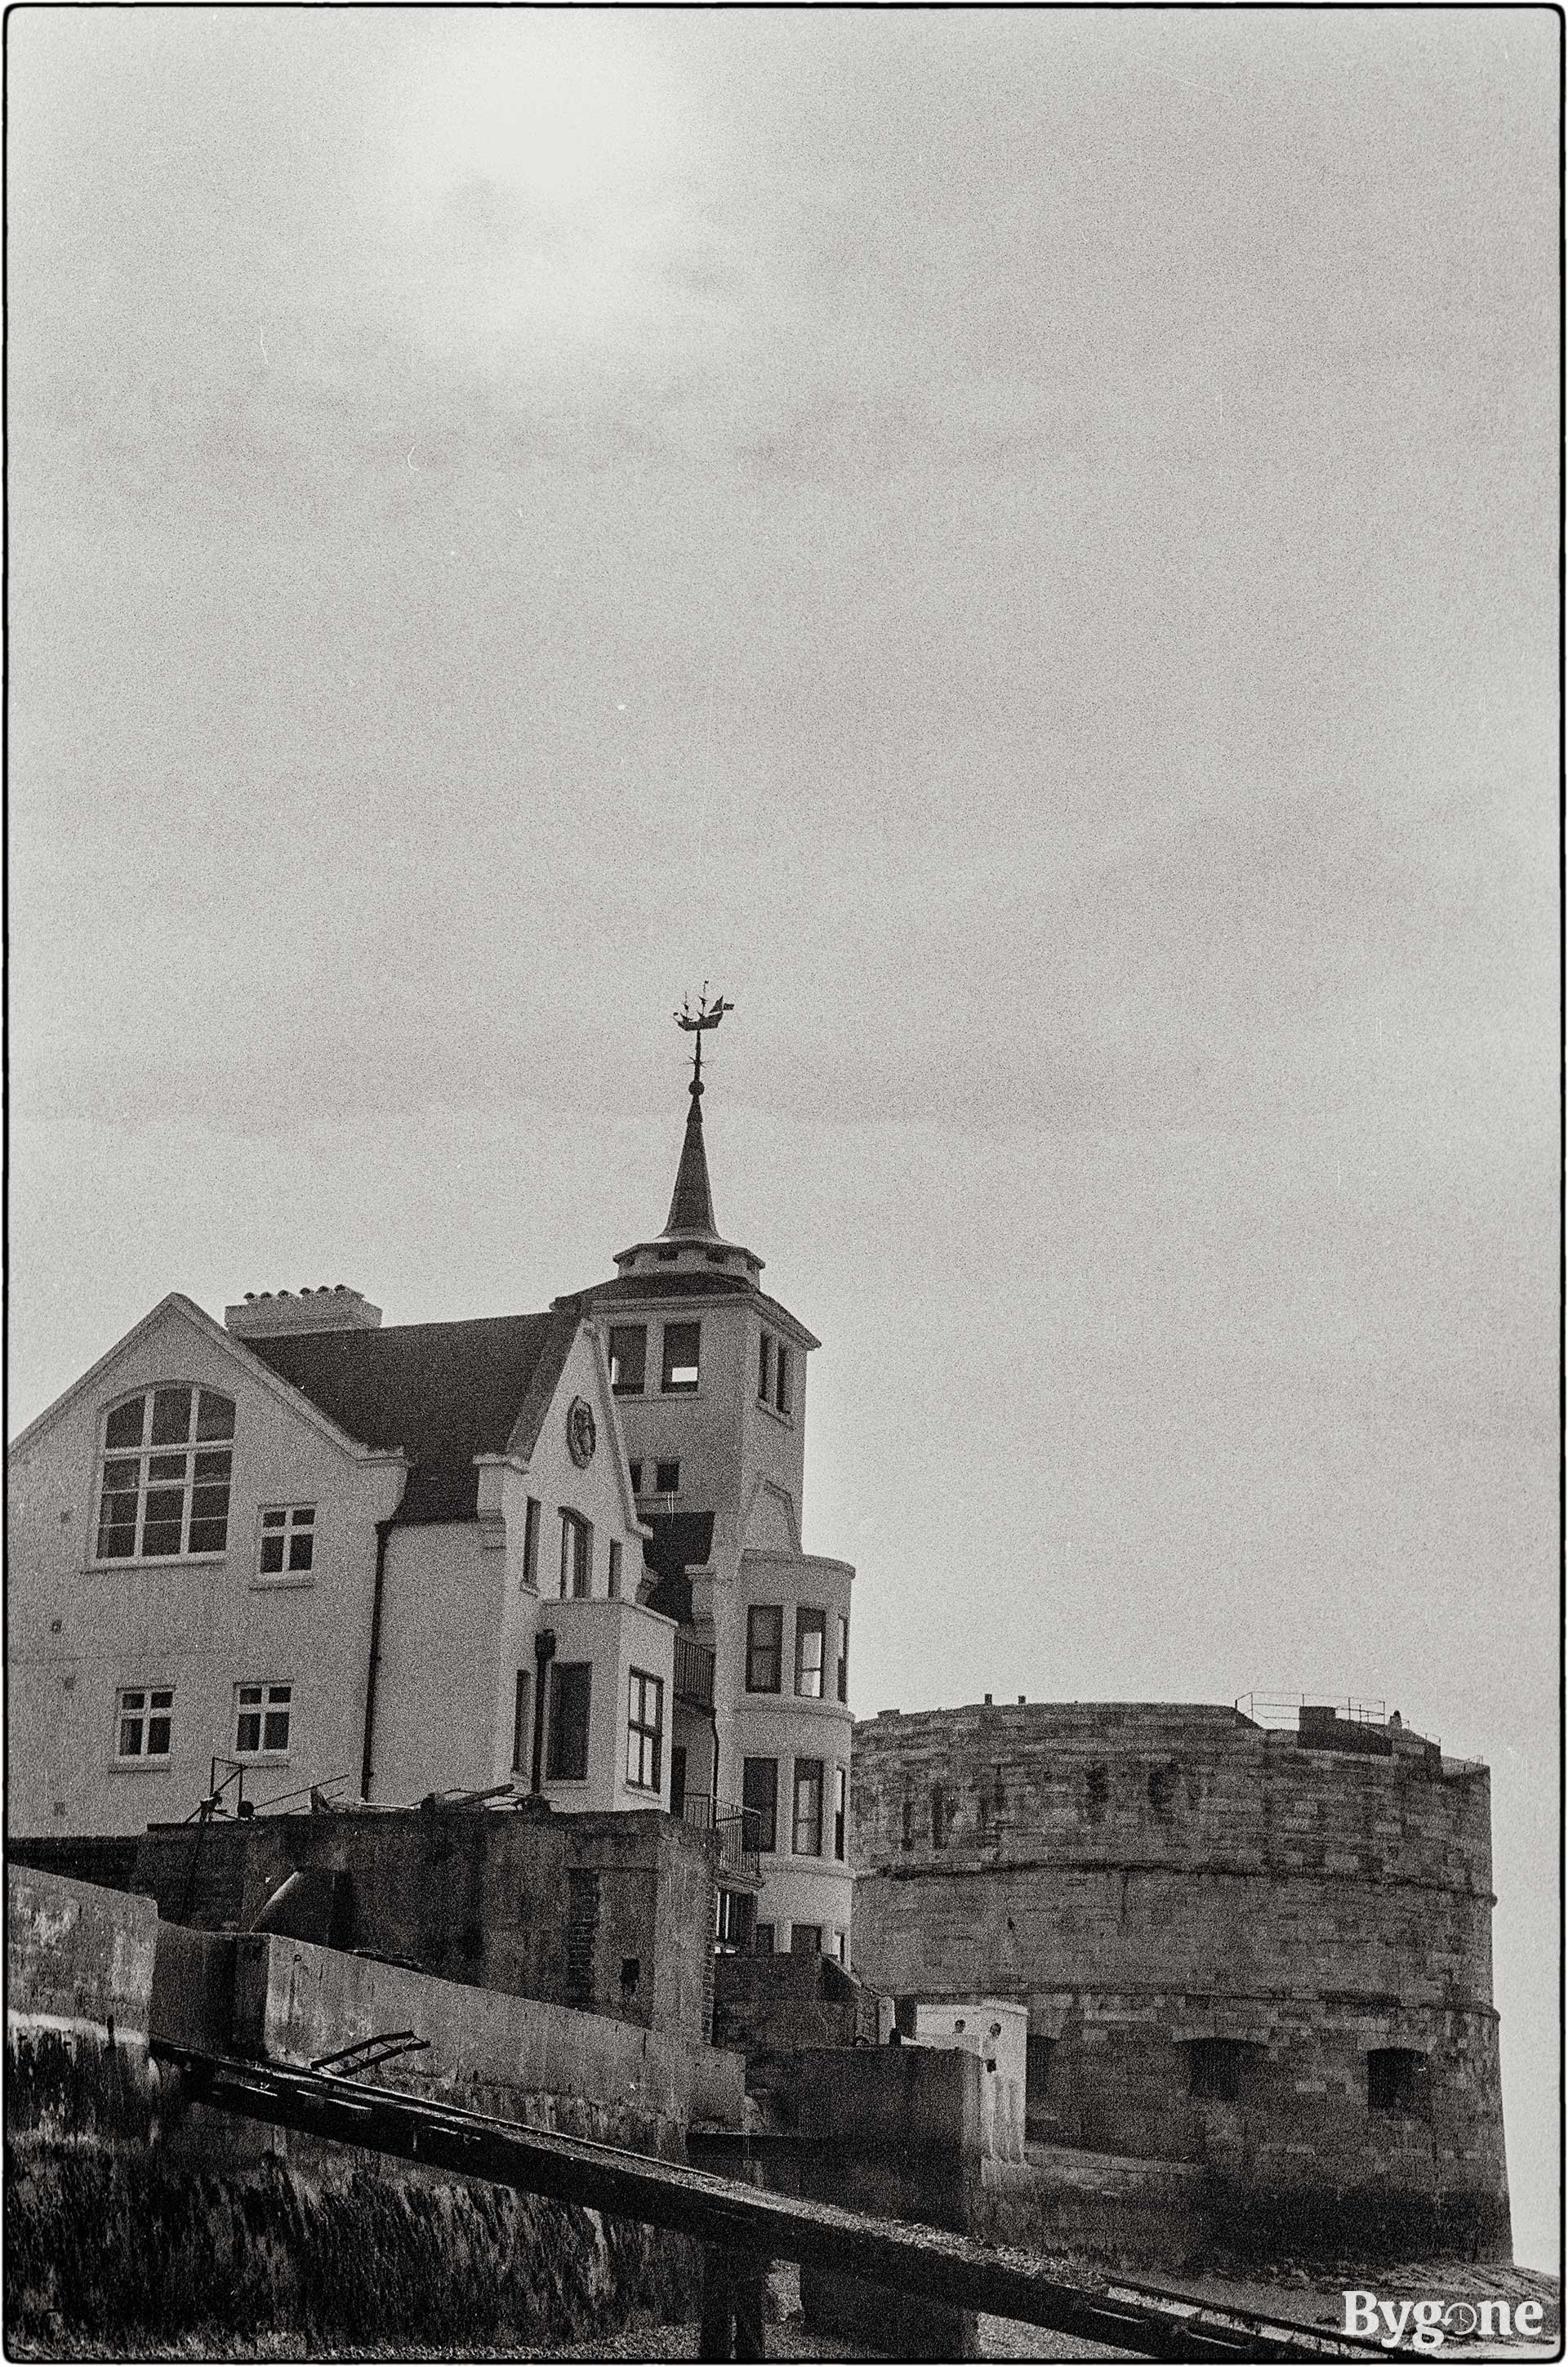 Tower House and Round Tower, Old Portsmouth